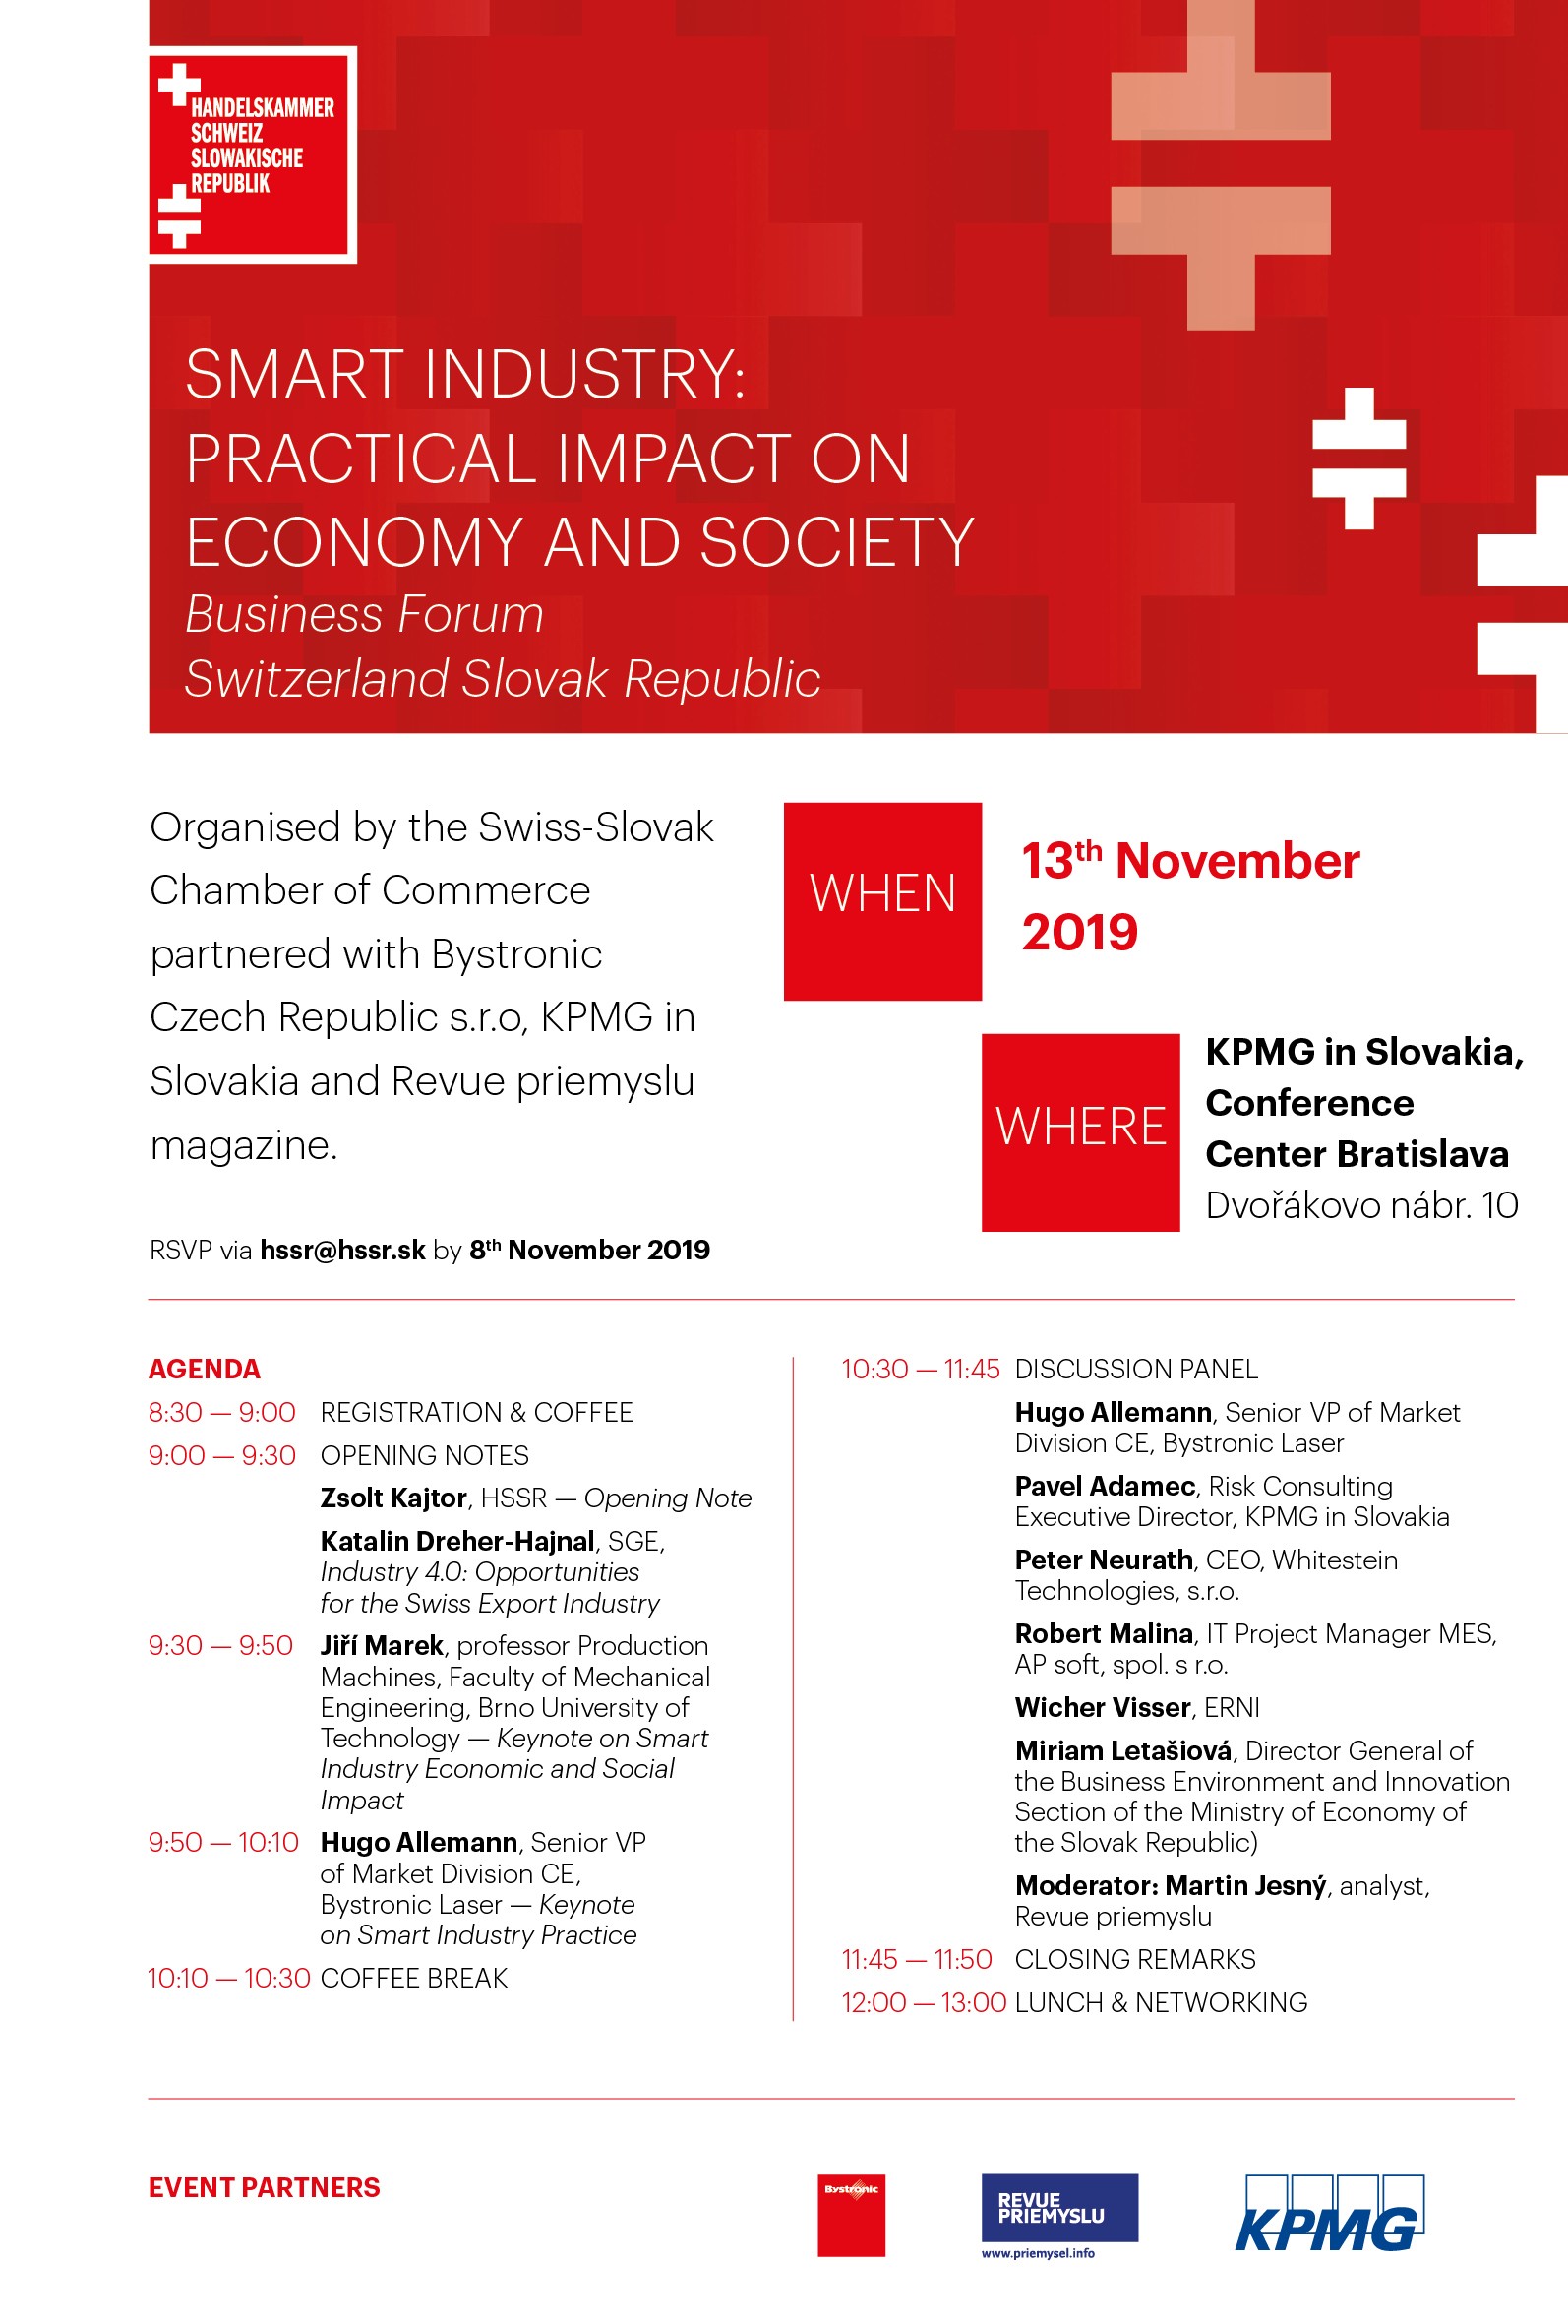 INVITATION - Smart Industry: Practical Impact on Economy and Society